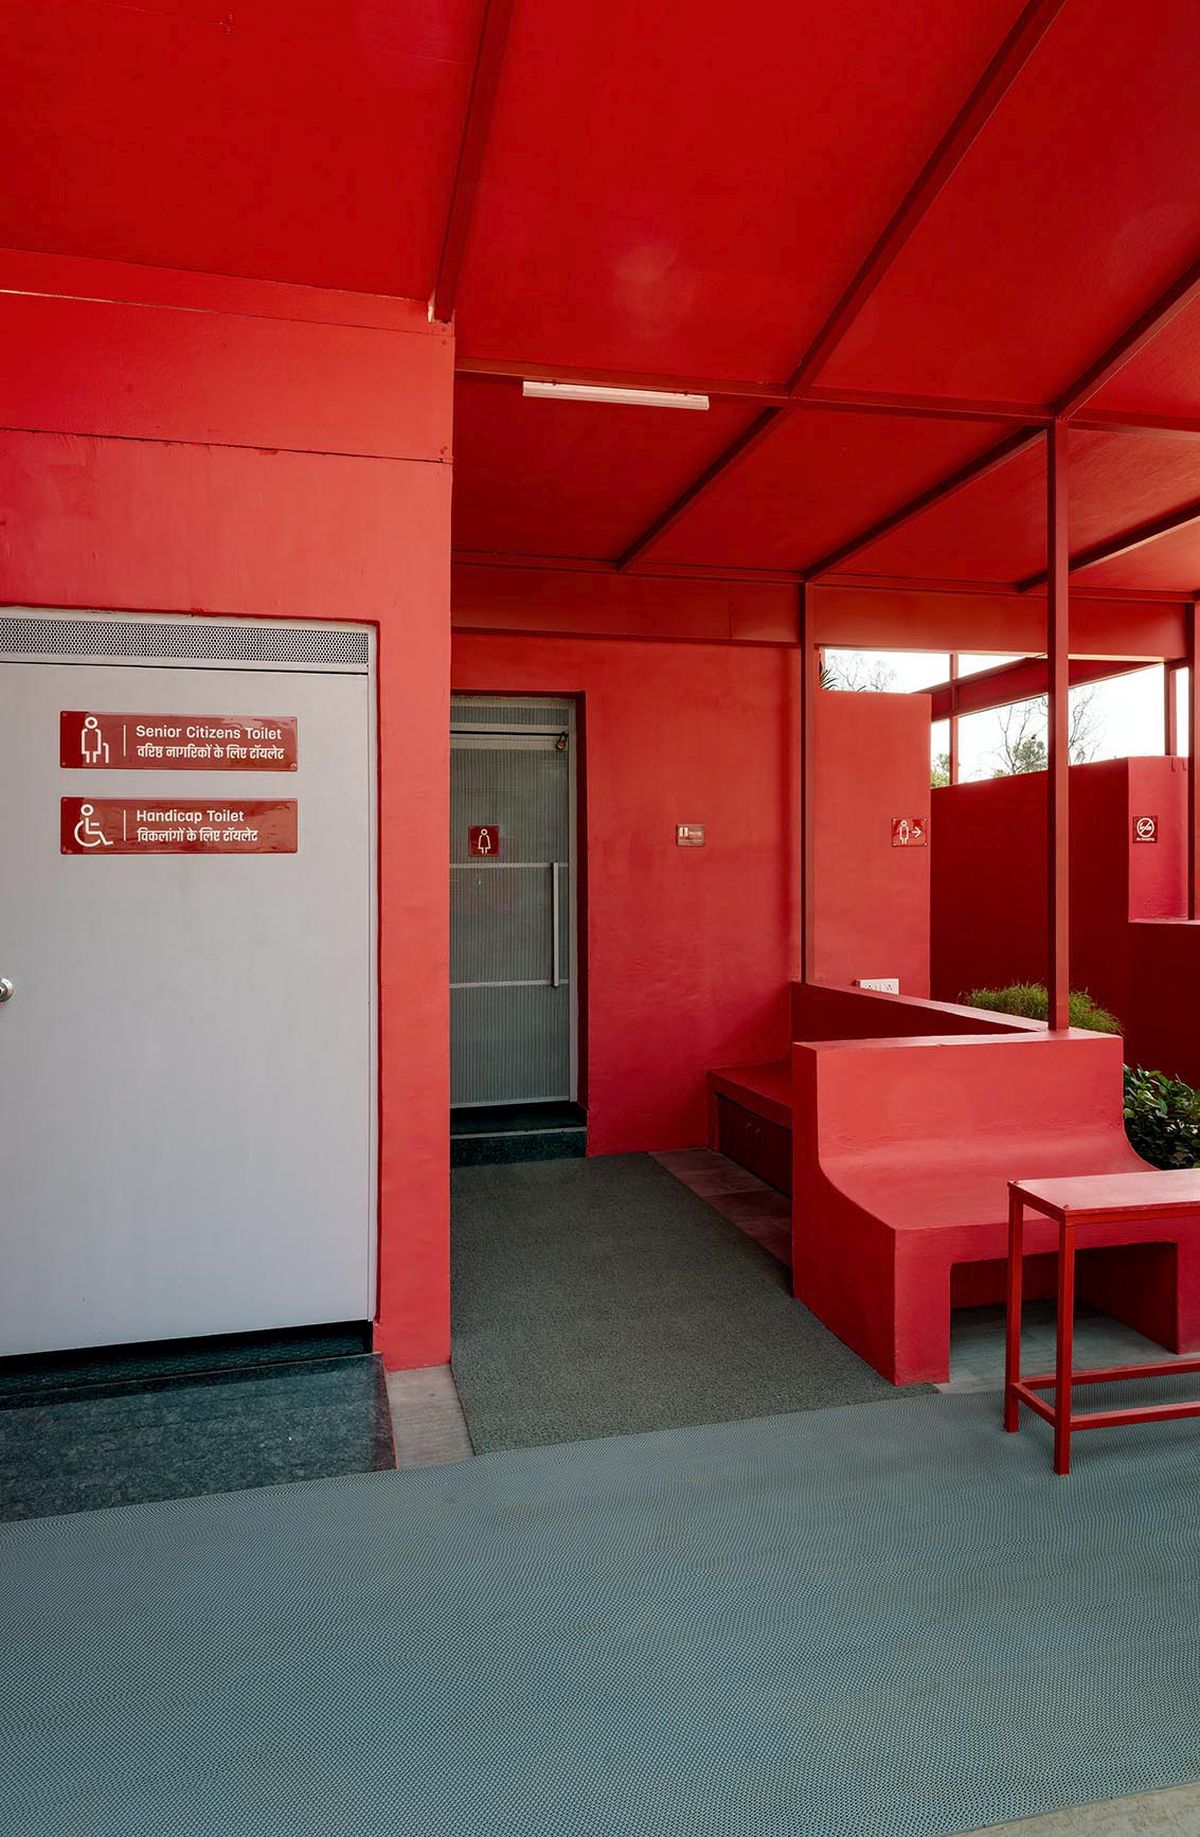 Pause - Restrooms, at Bombay-Goa Highway, by RC Architects 3